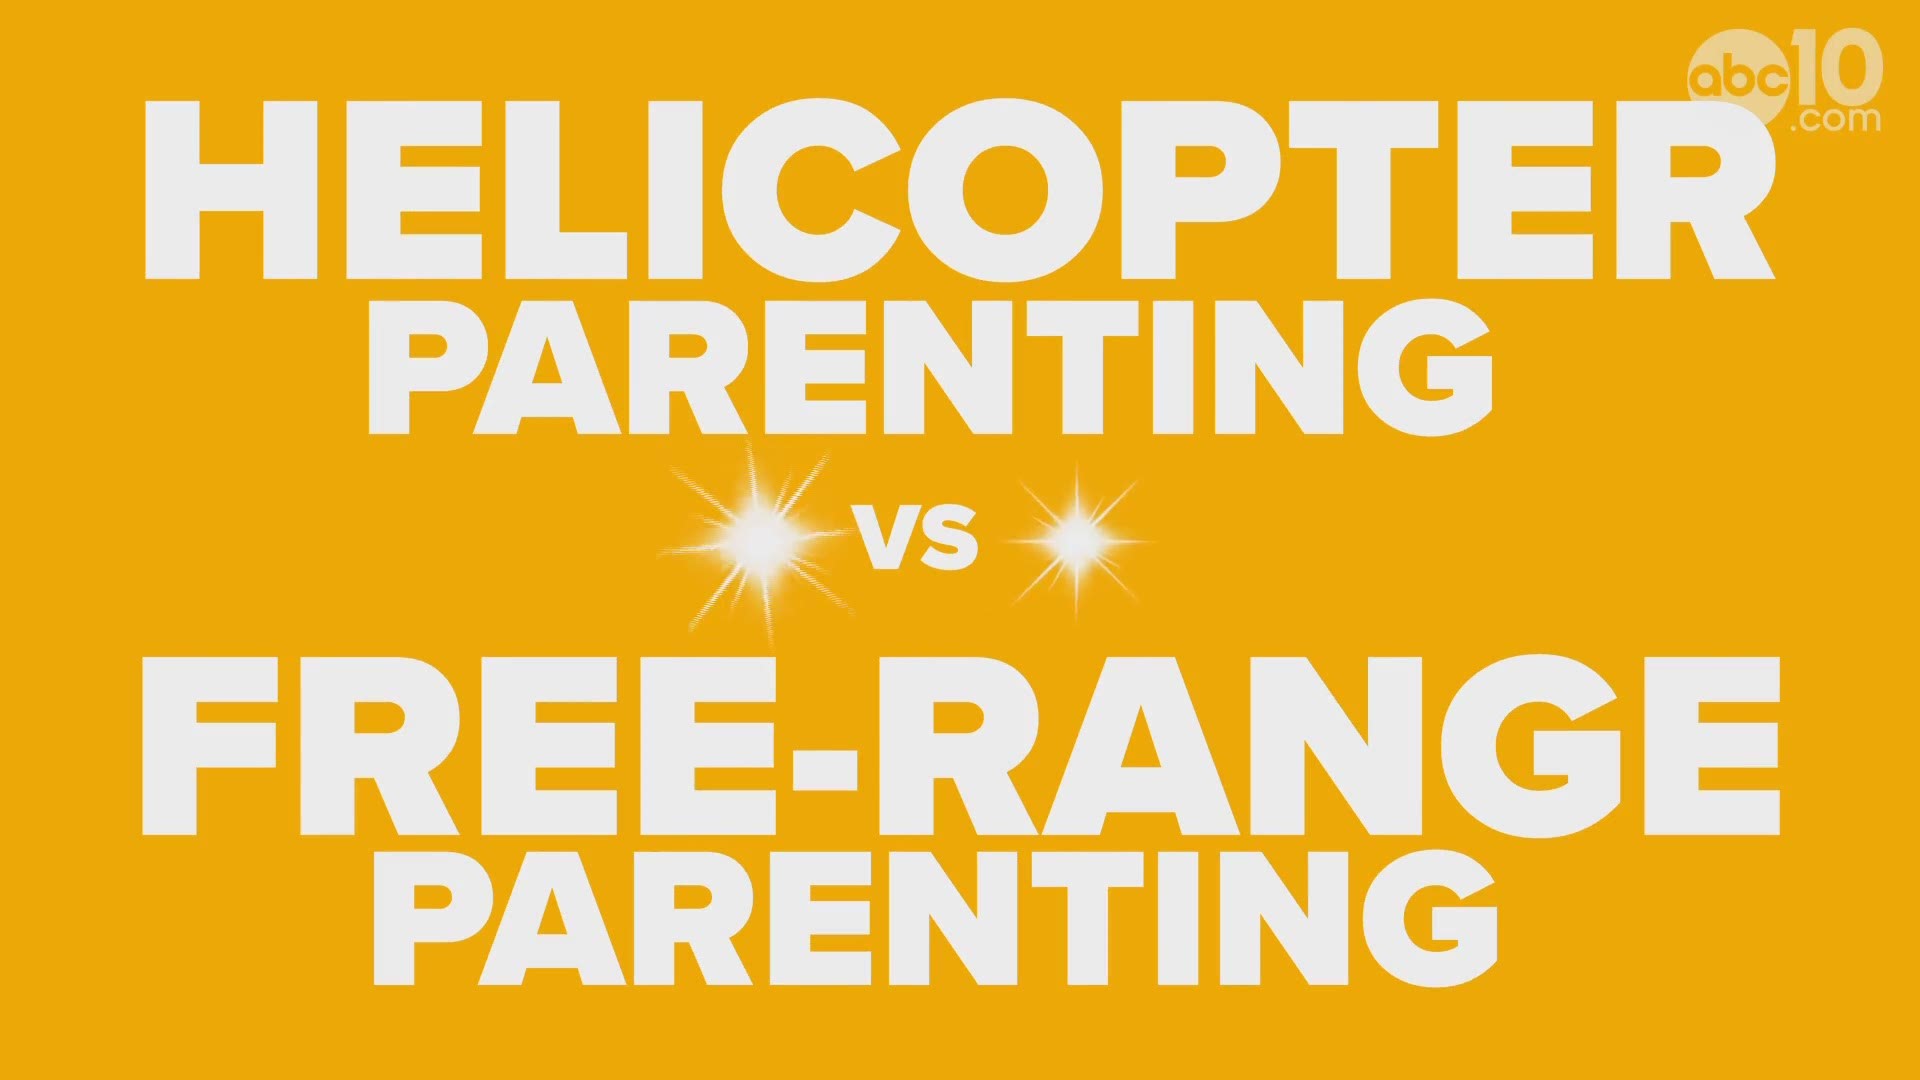 Helicopter Parenting vs Free-Range Parenting I Moms Explain It All
Do you hover over every single aspect of your kid's life like a helicopter? Or do you take the back seat and give your kid independence? These real moms explain it all on parenting